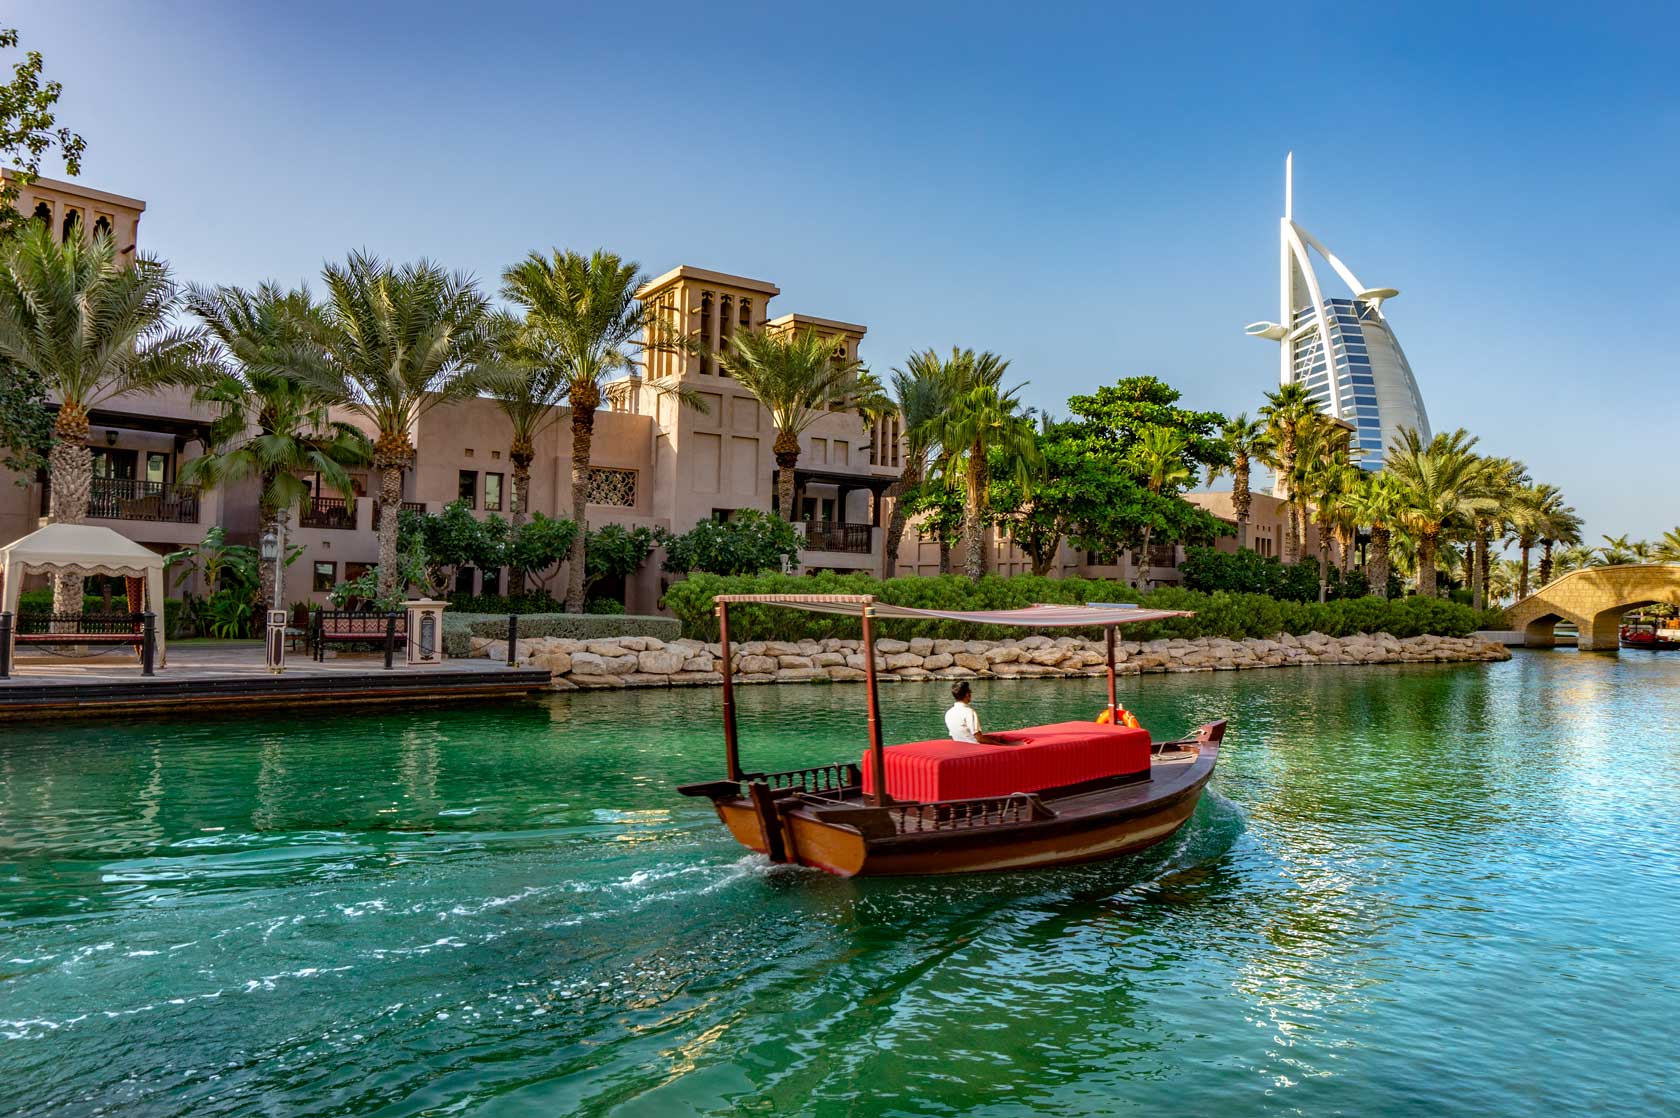 Day 3: Discover the Hidden Gems of Dubai with Abra Ride